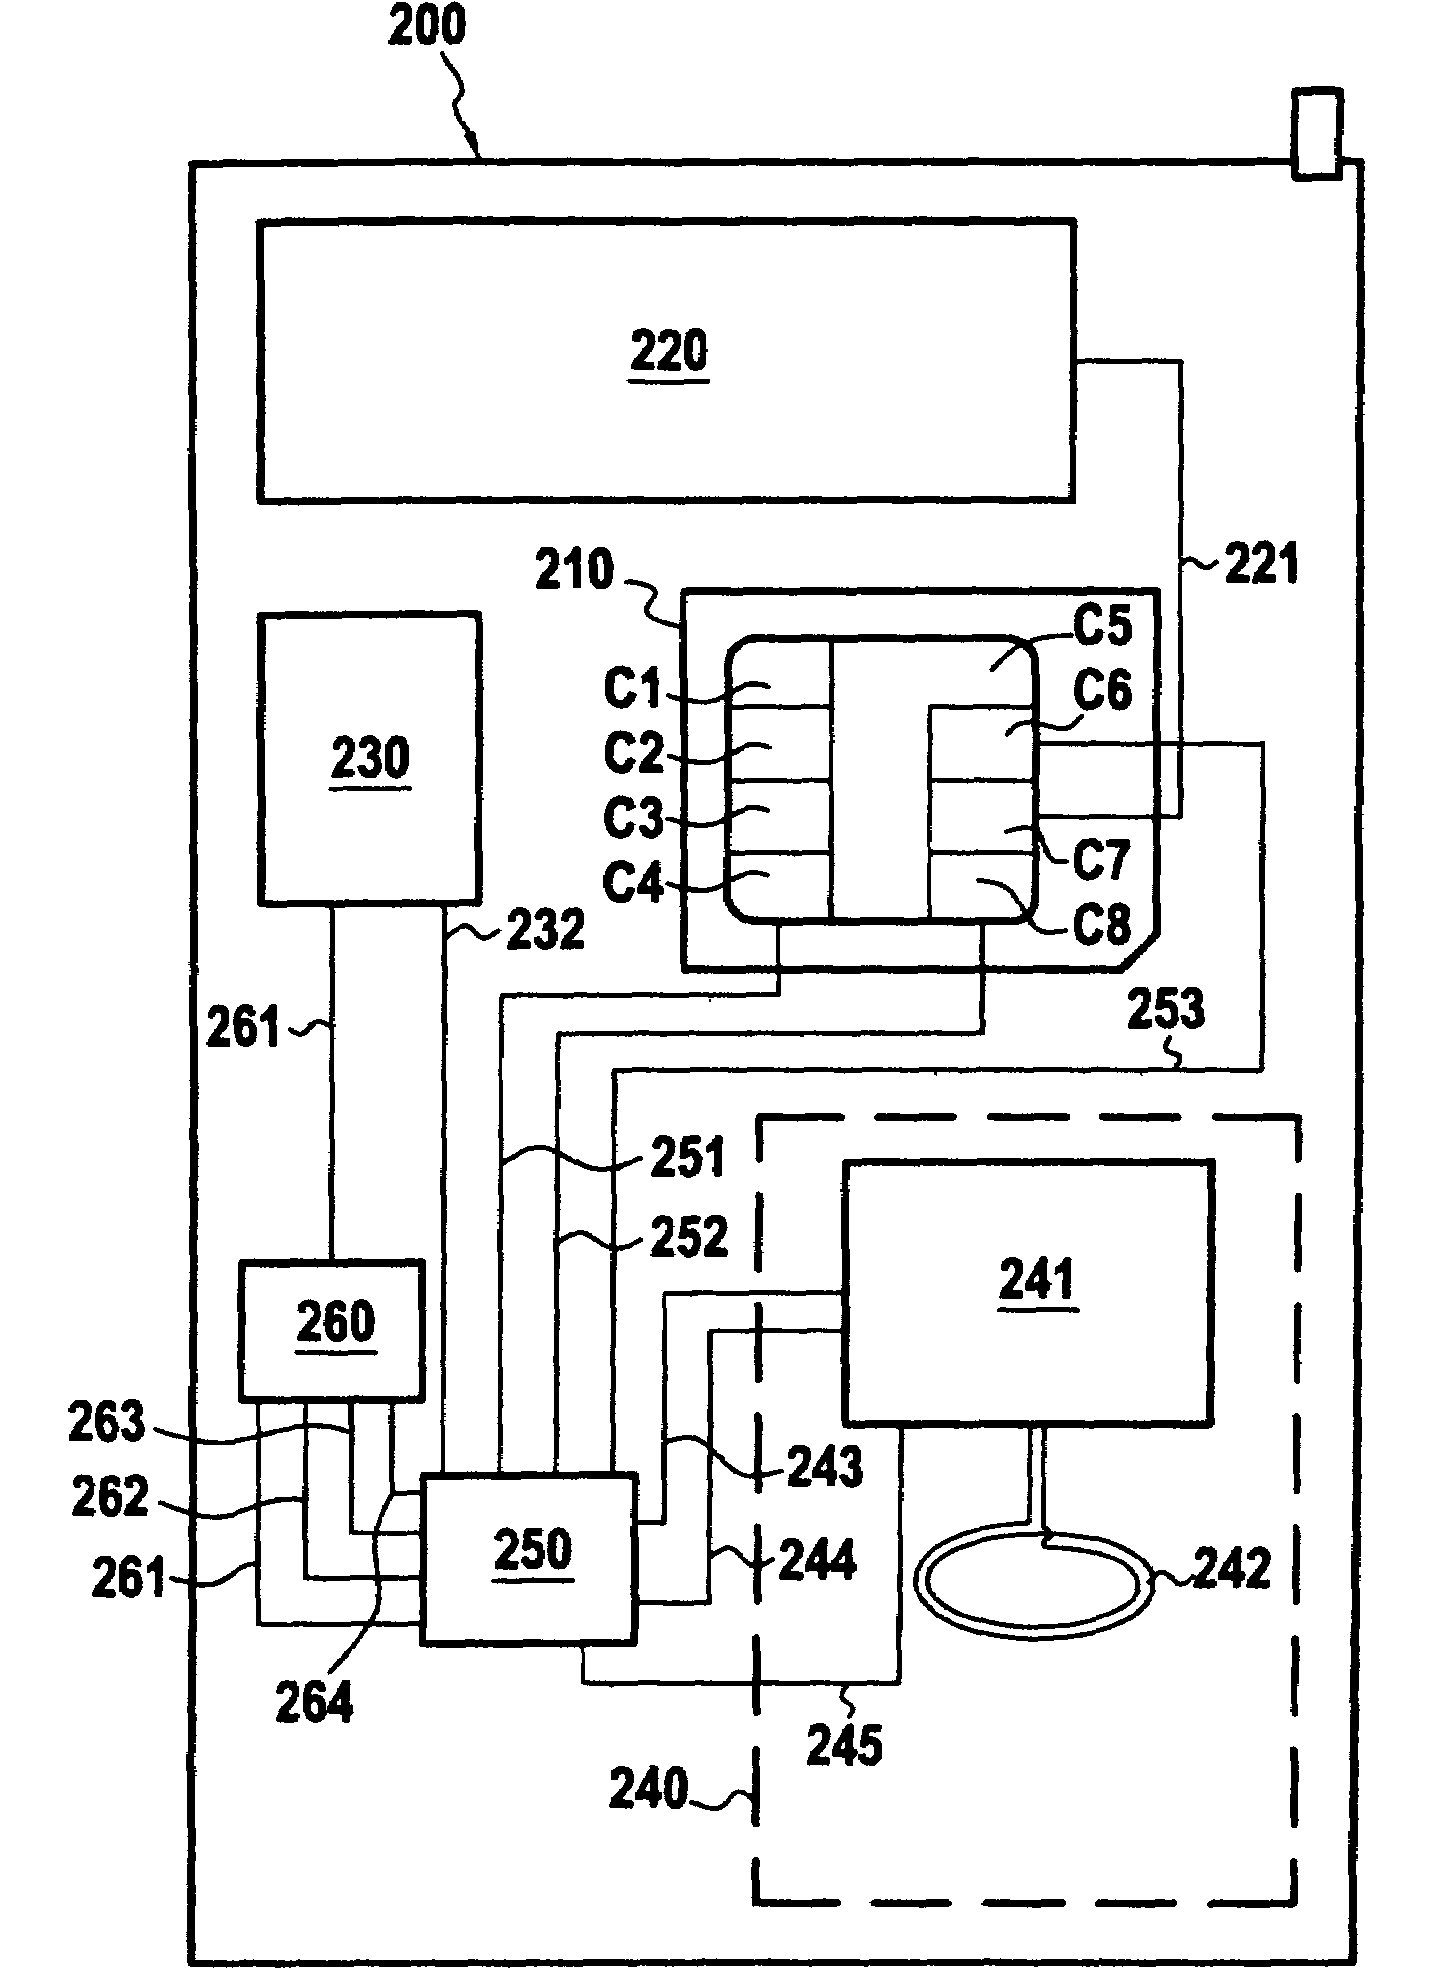 Method of dynamically allocating contacts of a subscriber chip in a mobile terminal, and corresponding subscriber chip card and mobile terminal